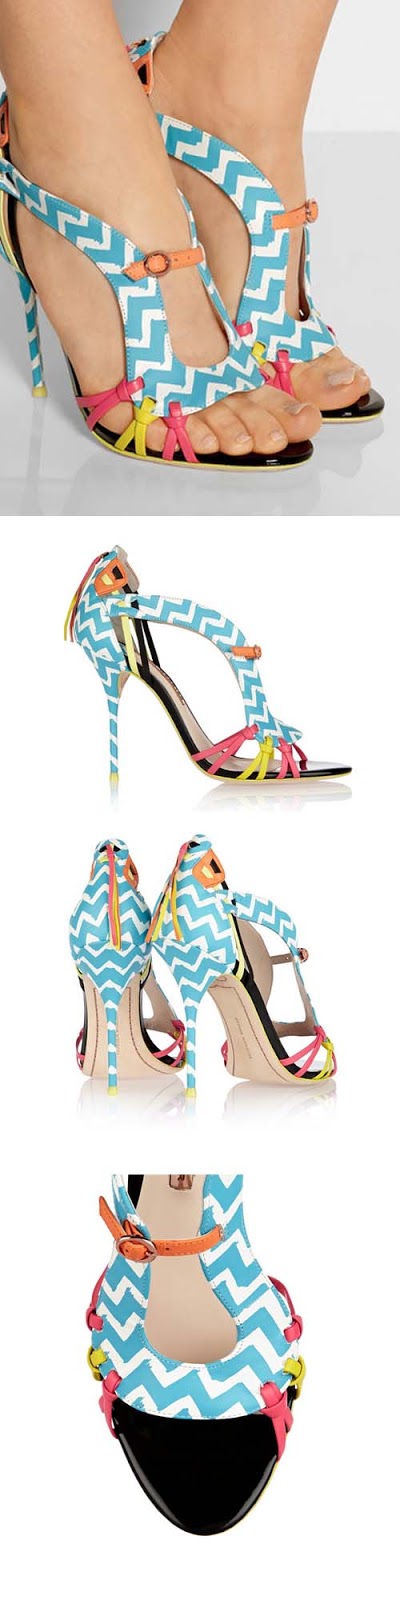 Shopping My Style: 5 Colorful Sophia Webster Sandals